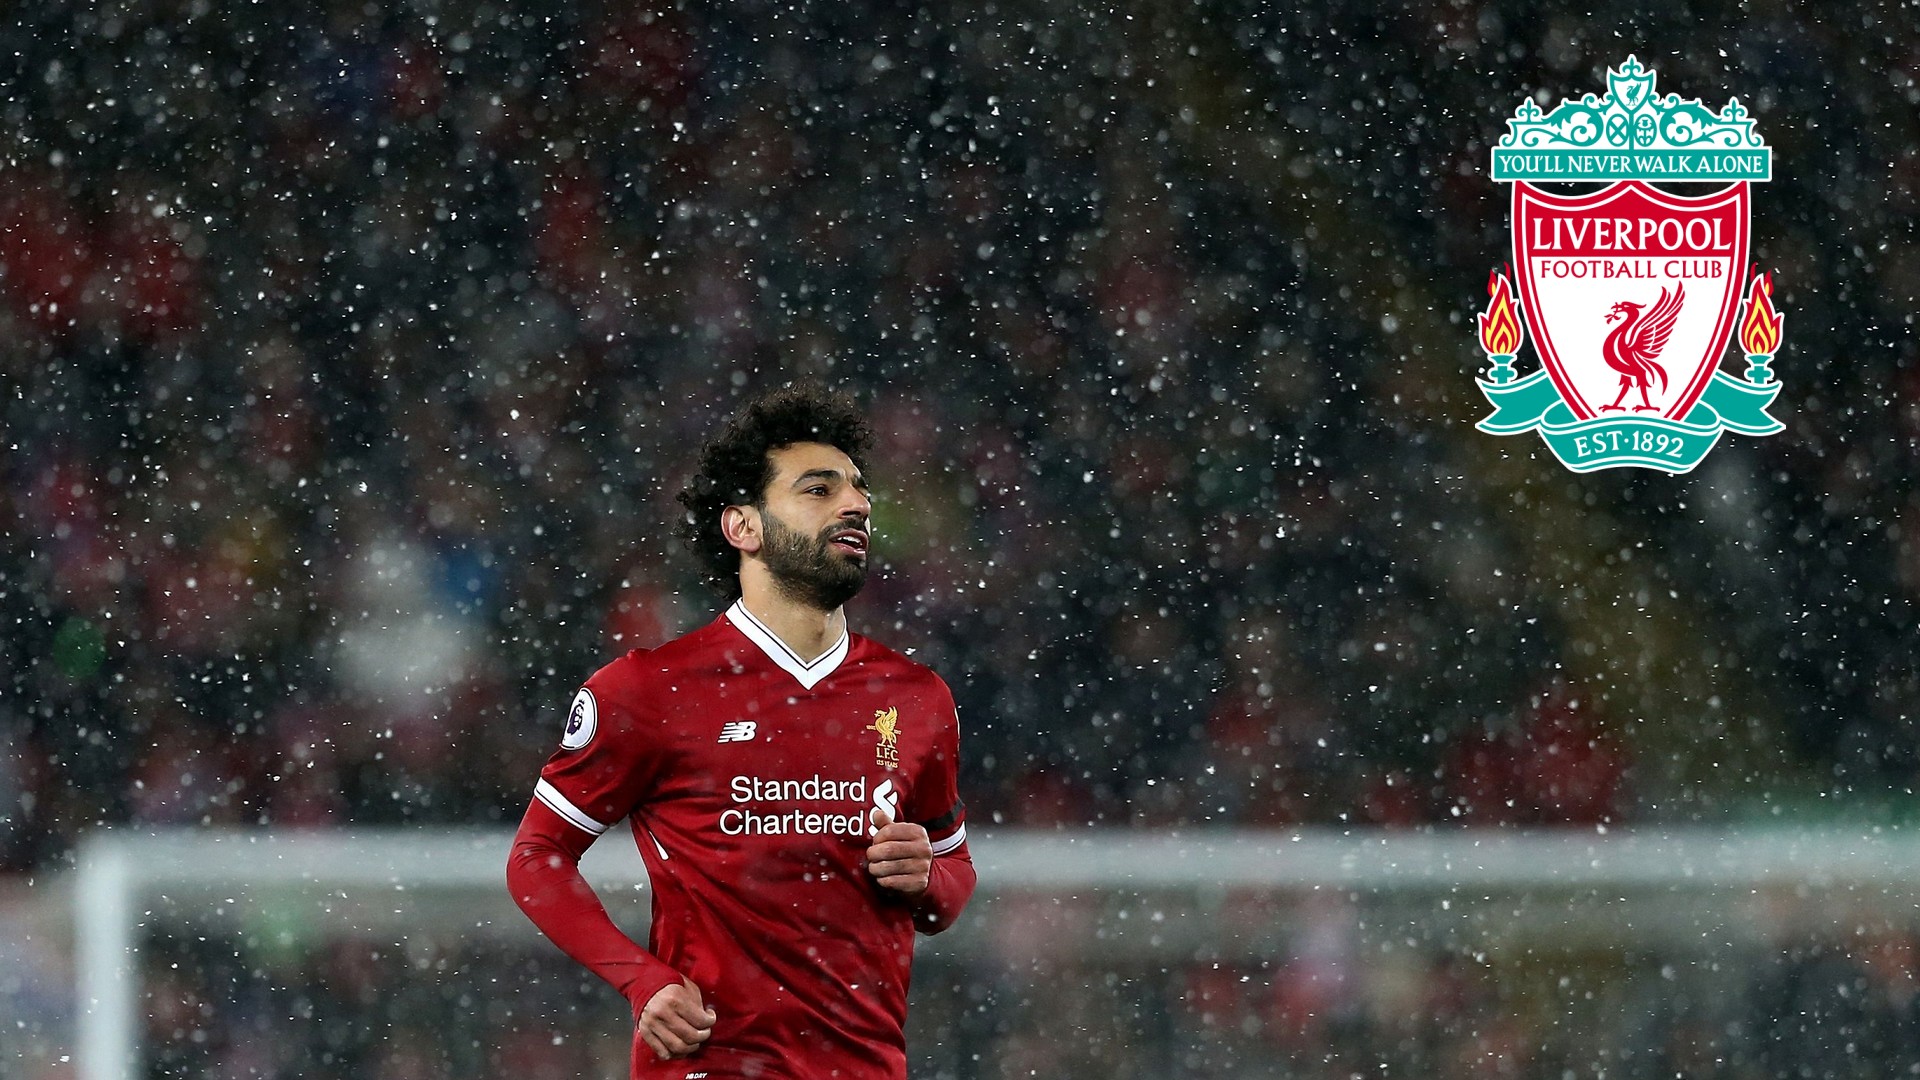 Mohamed Salah Liverpool Desktop Wallpaper with image resolution 1920x1080 pixel. You can use this wallpaper as background for your desktop Computer Screensavers, Android or iPhone smartphones